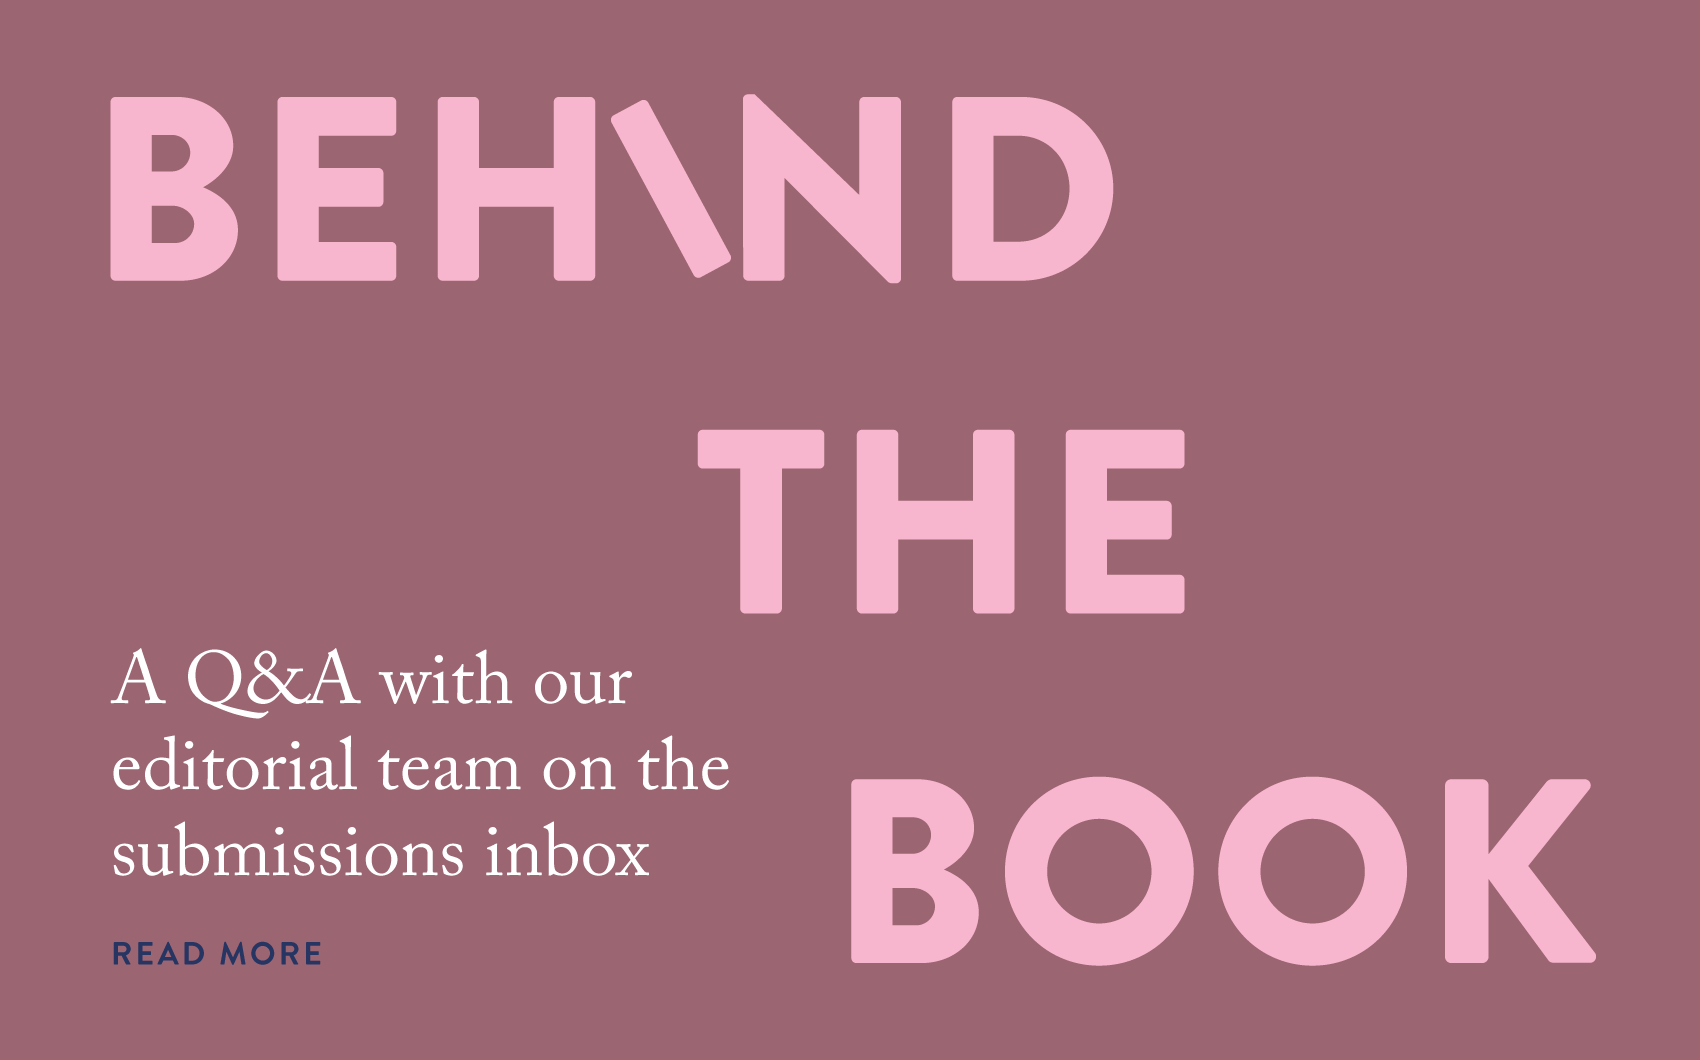 Behind the Book: A Q&A with our editorial team on the submissions inbox